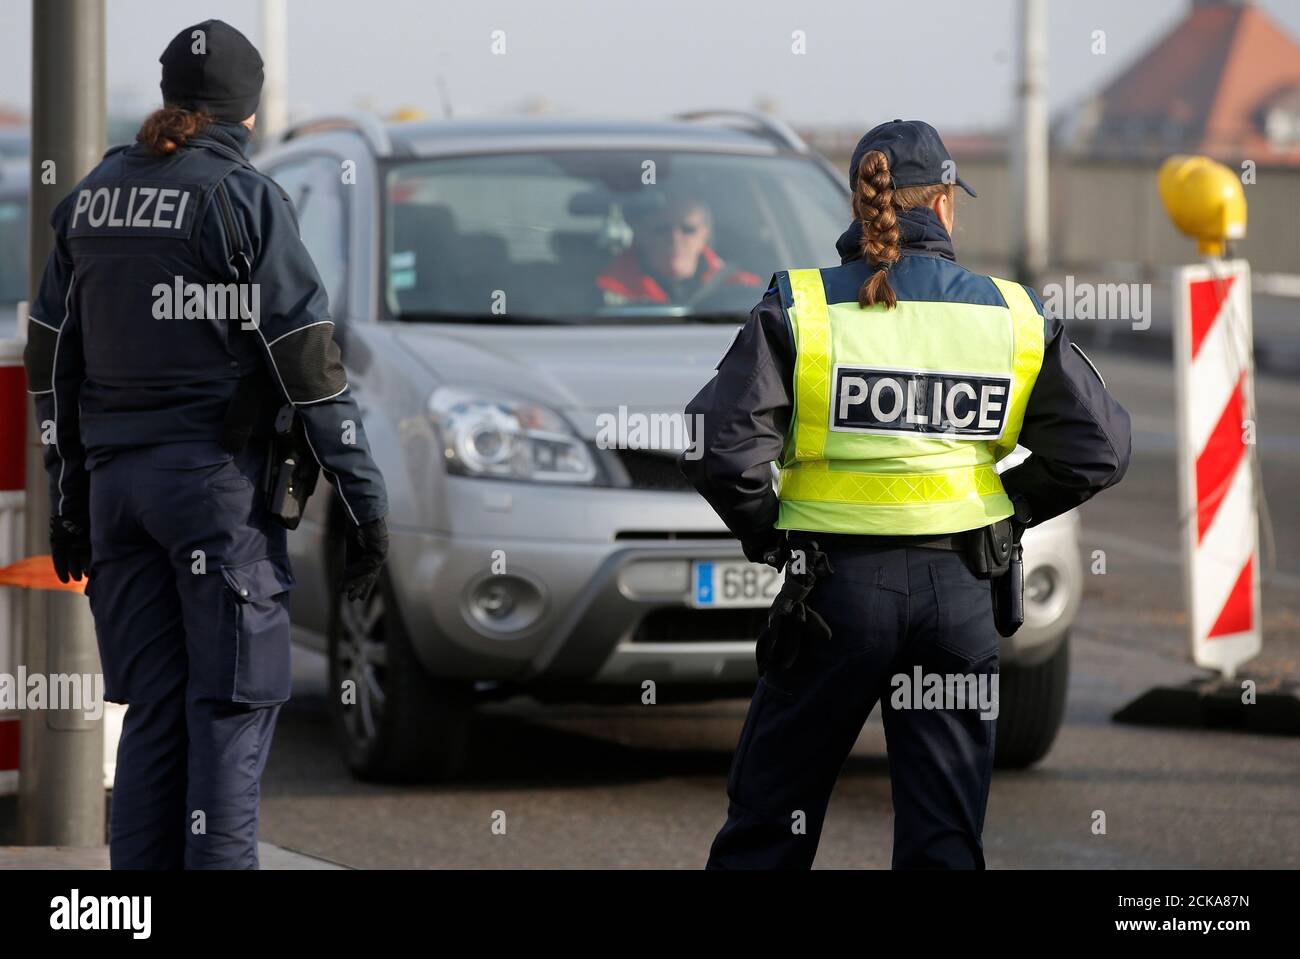 French and German police conduct a control at the French-German border at  the "Le Pont de l'Europe" bridge in Strasbourg, France, to check vehicles  and verify the identity of travellers as security